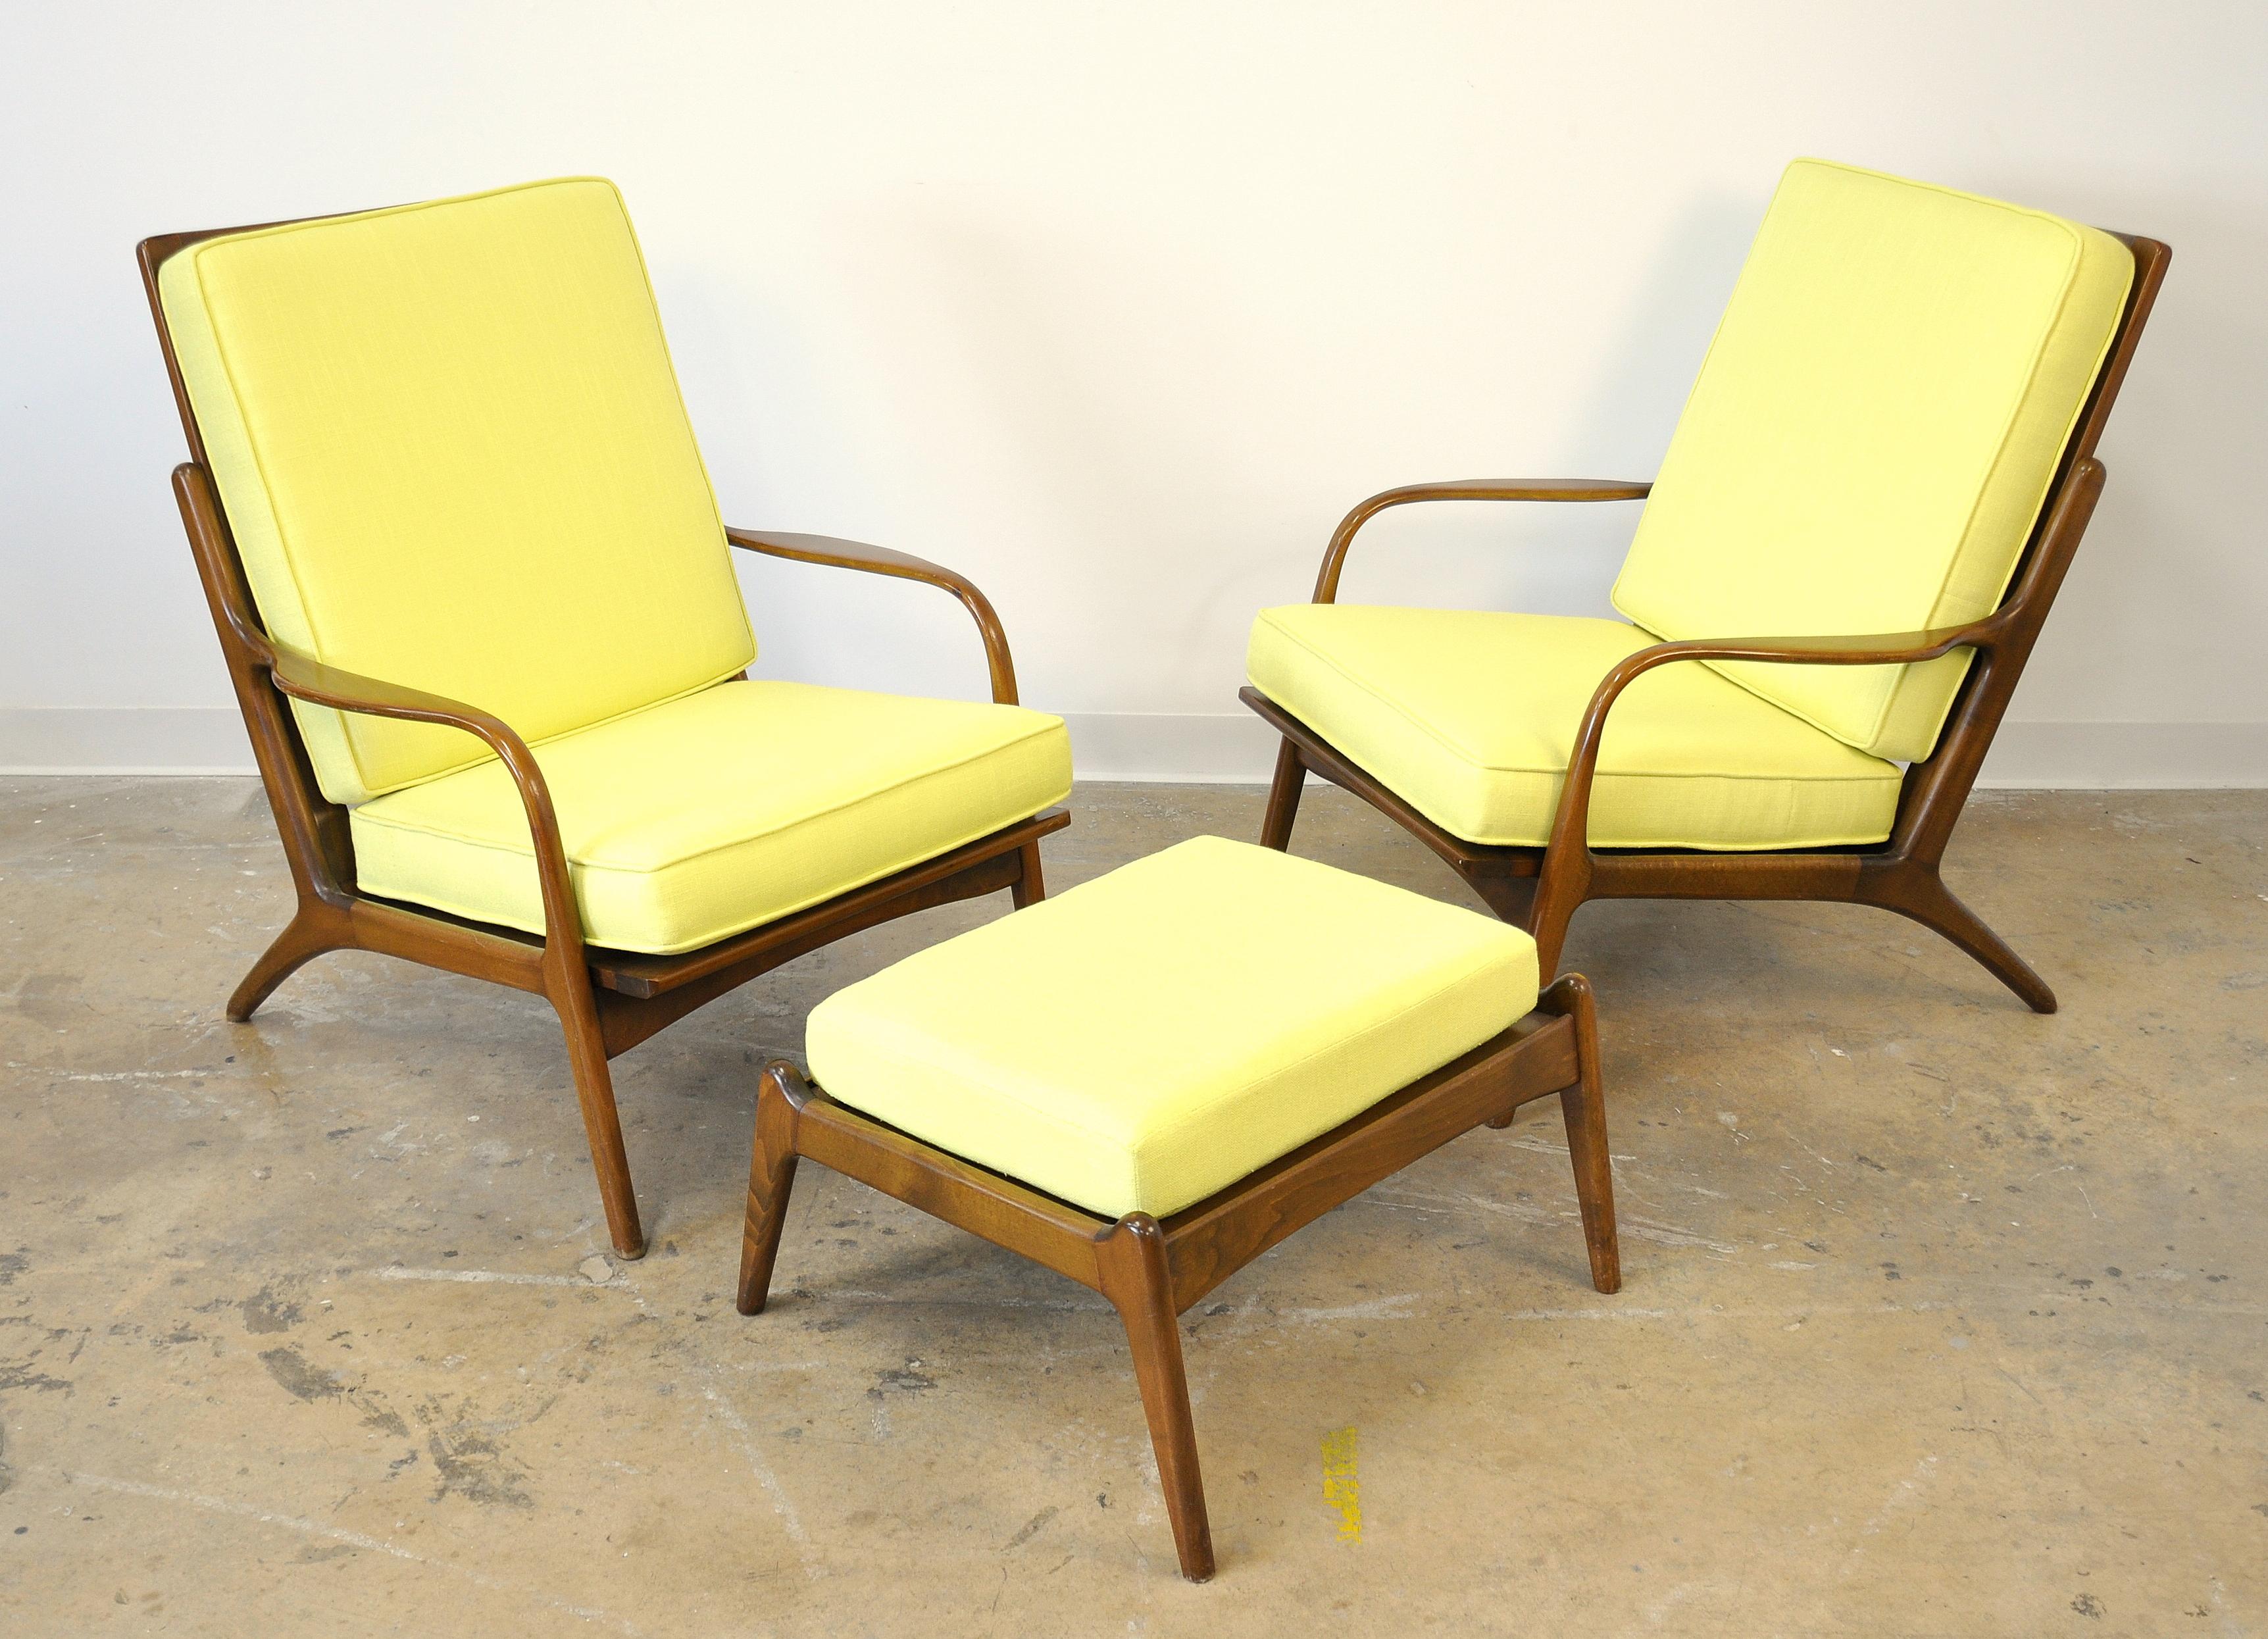 A pair of vintage midcentury high back easy armchairs and foot stool, dating from the 1950s and attributed to designer Ib Kofod-Larsen. The frames of the chairs have sleek, slender arms, a spindle high back and splayed legs. Their lines are very